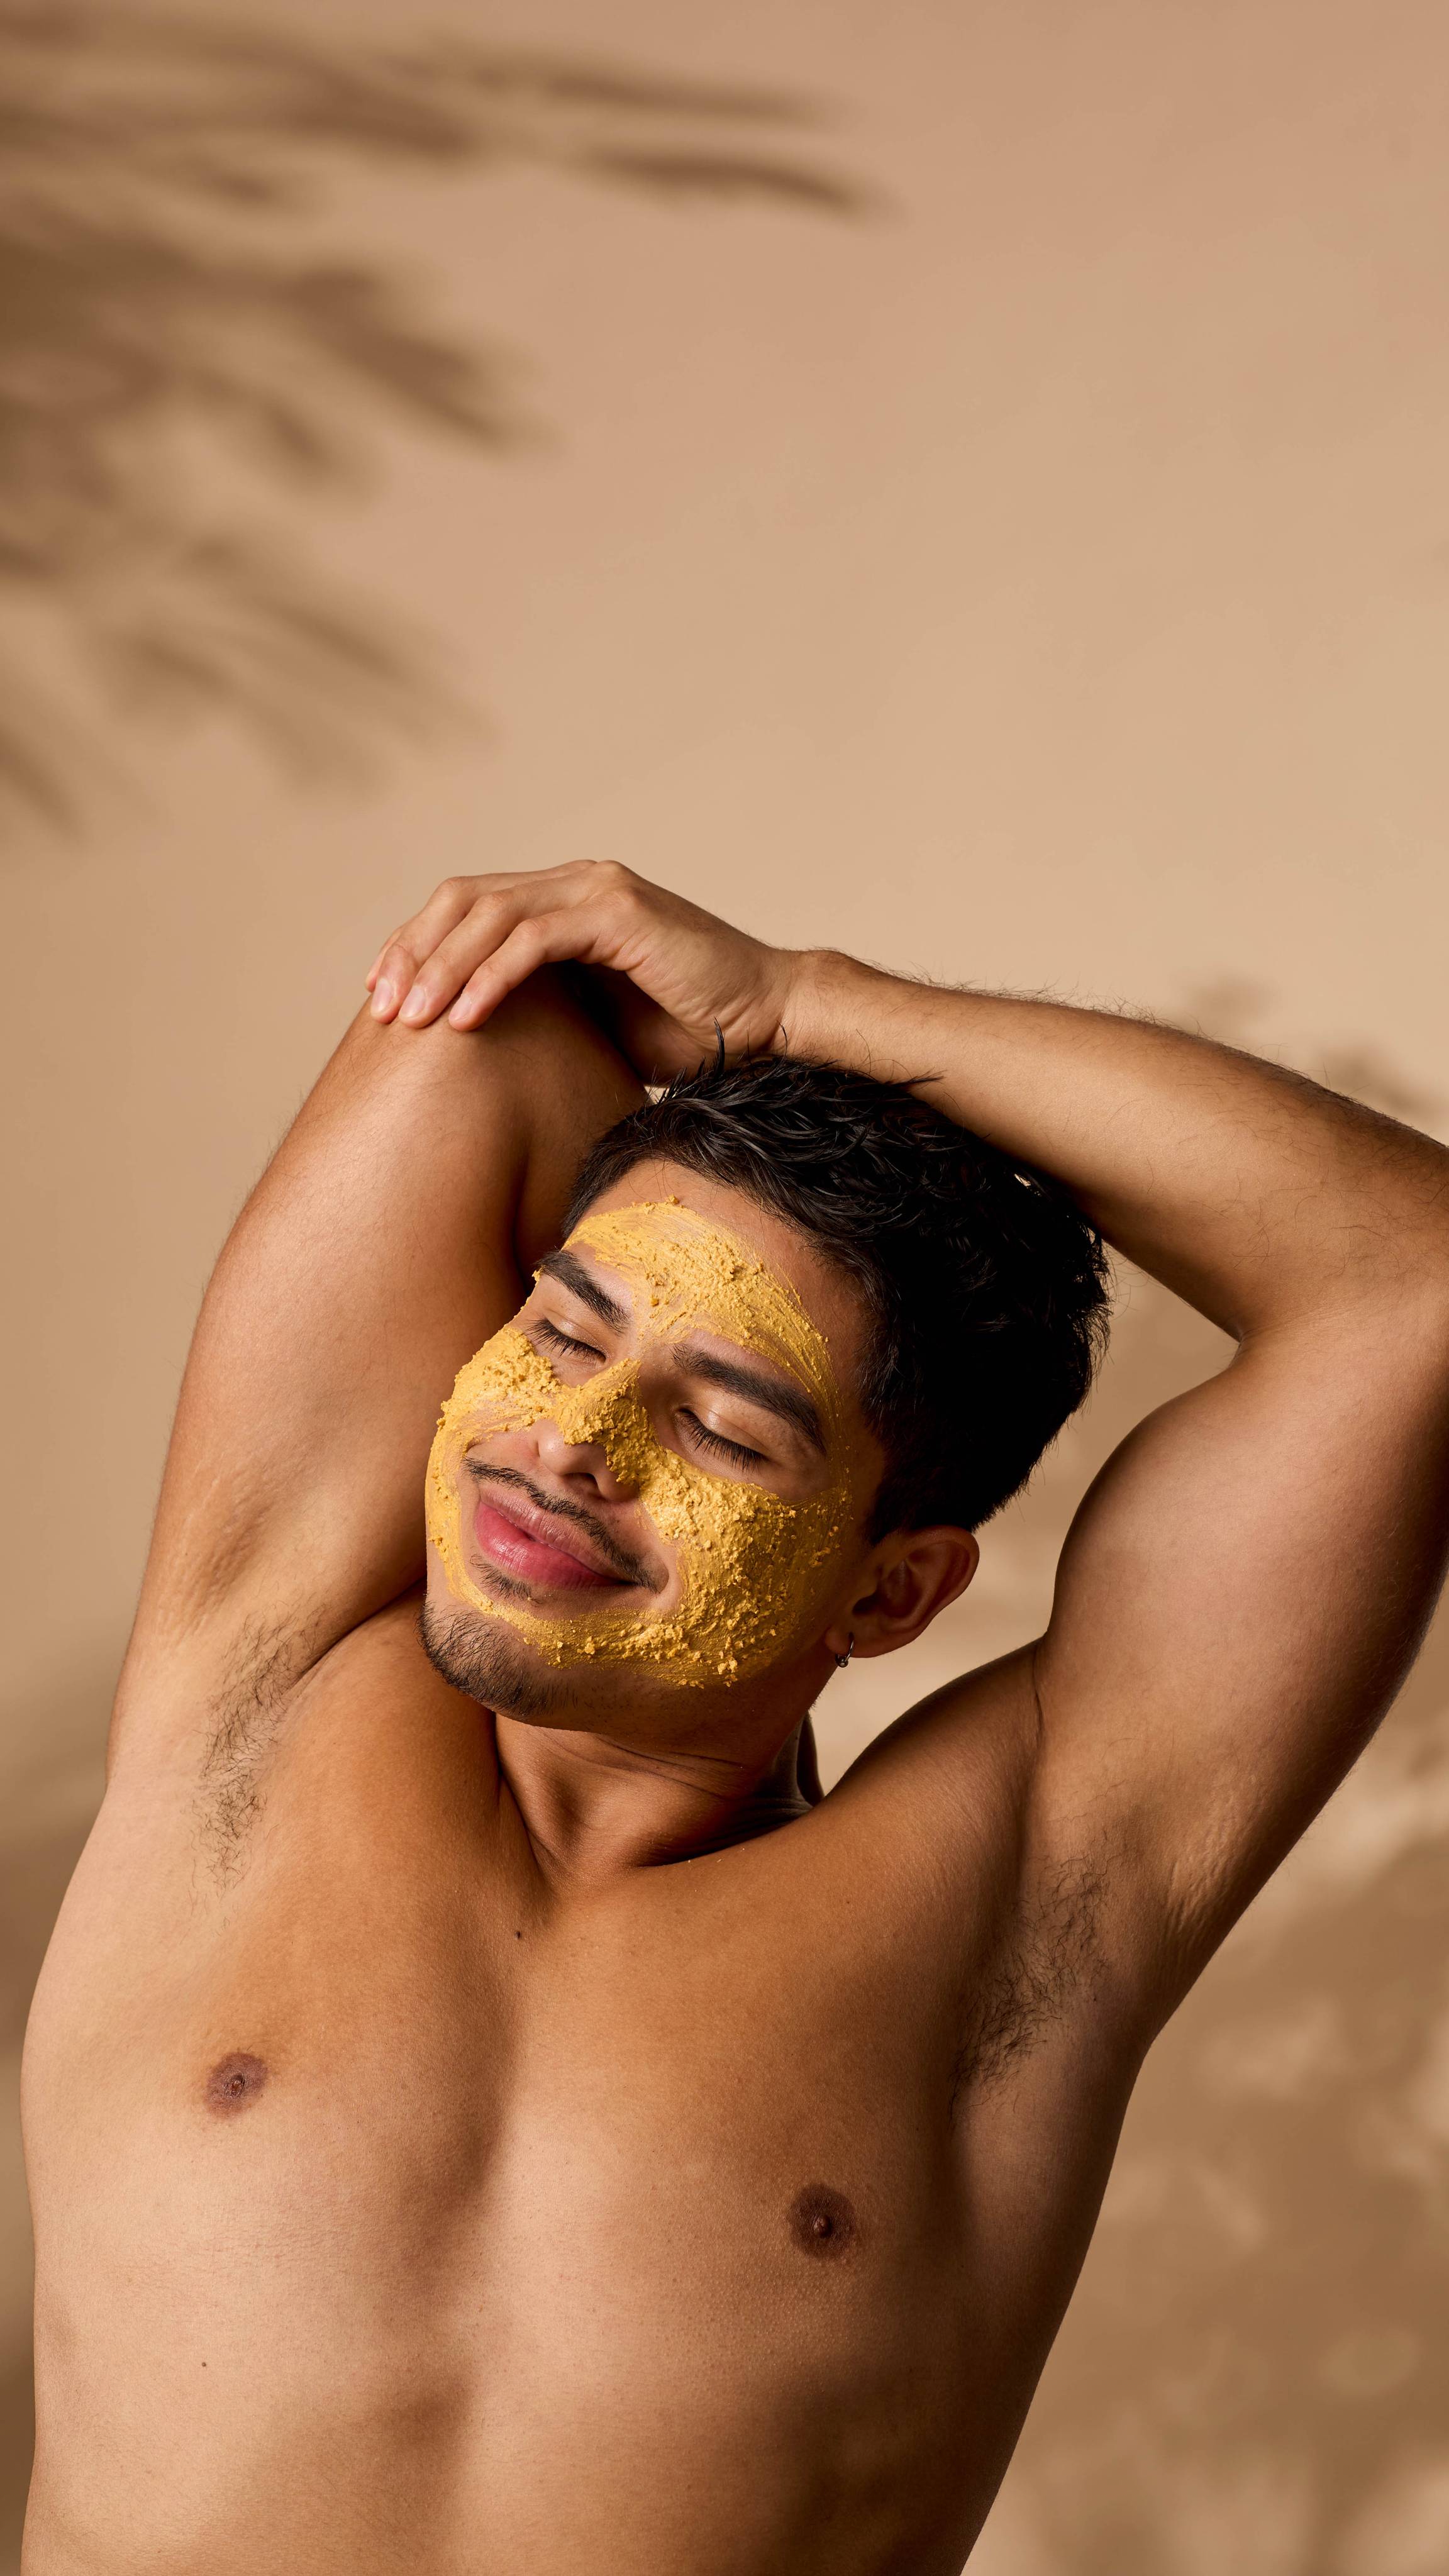 The image shows the model stretching with their eyes closed as their face is evenly covered in the Turmeric face mask.